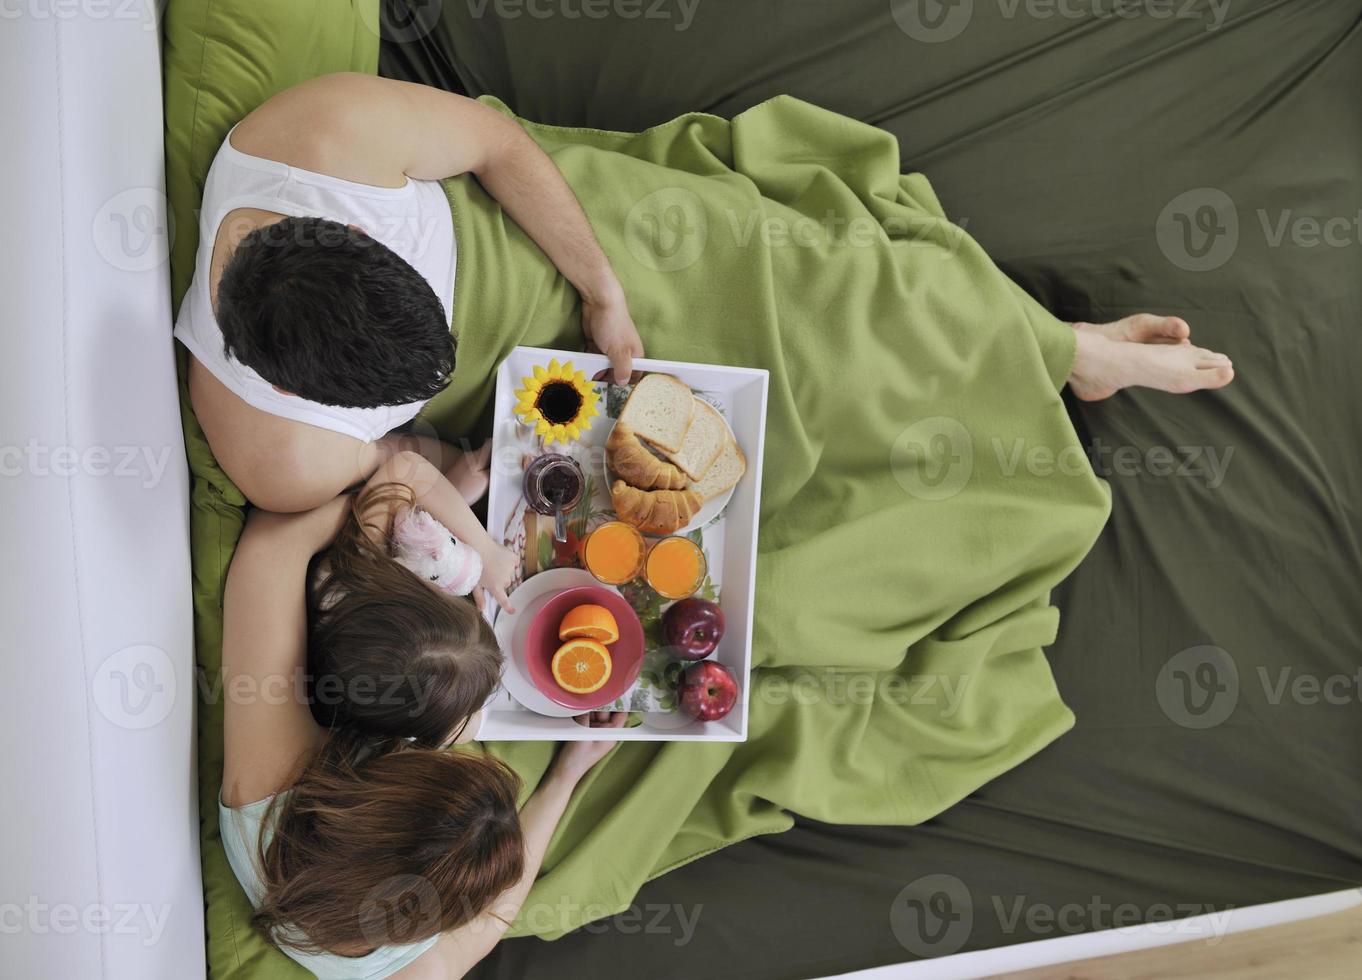 happy young family eat breakfast in bed photo